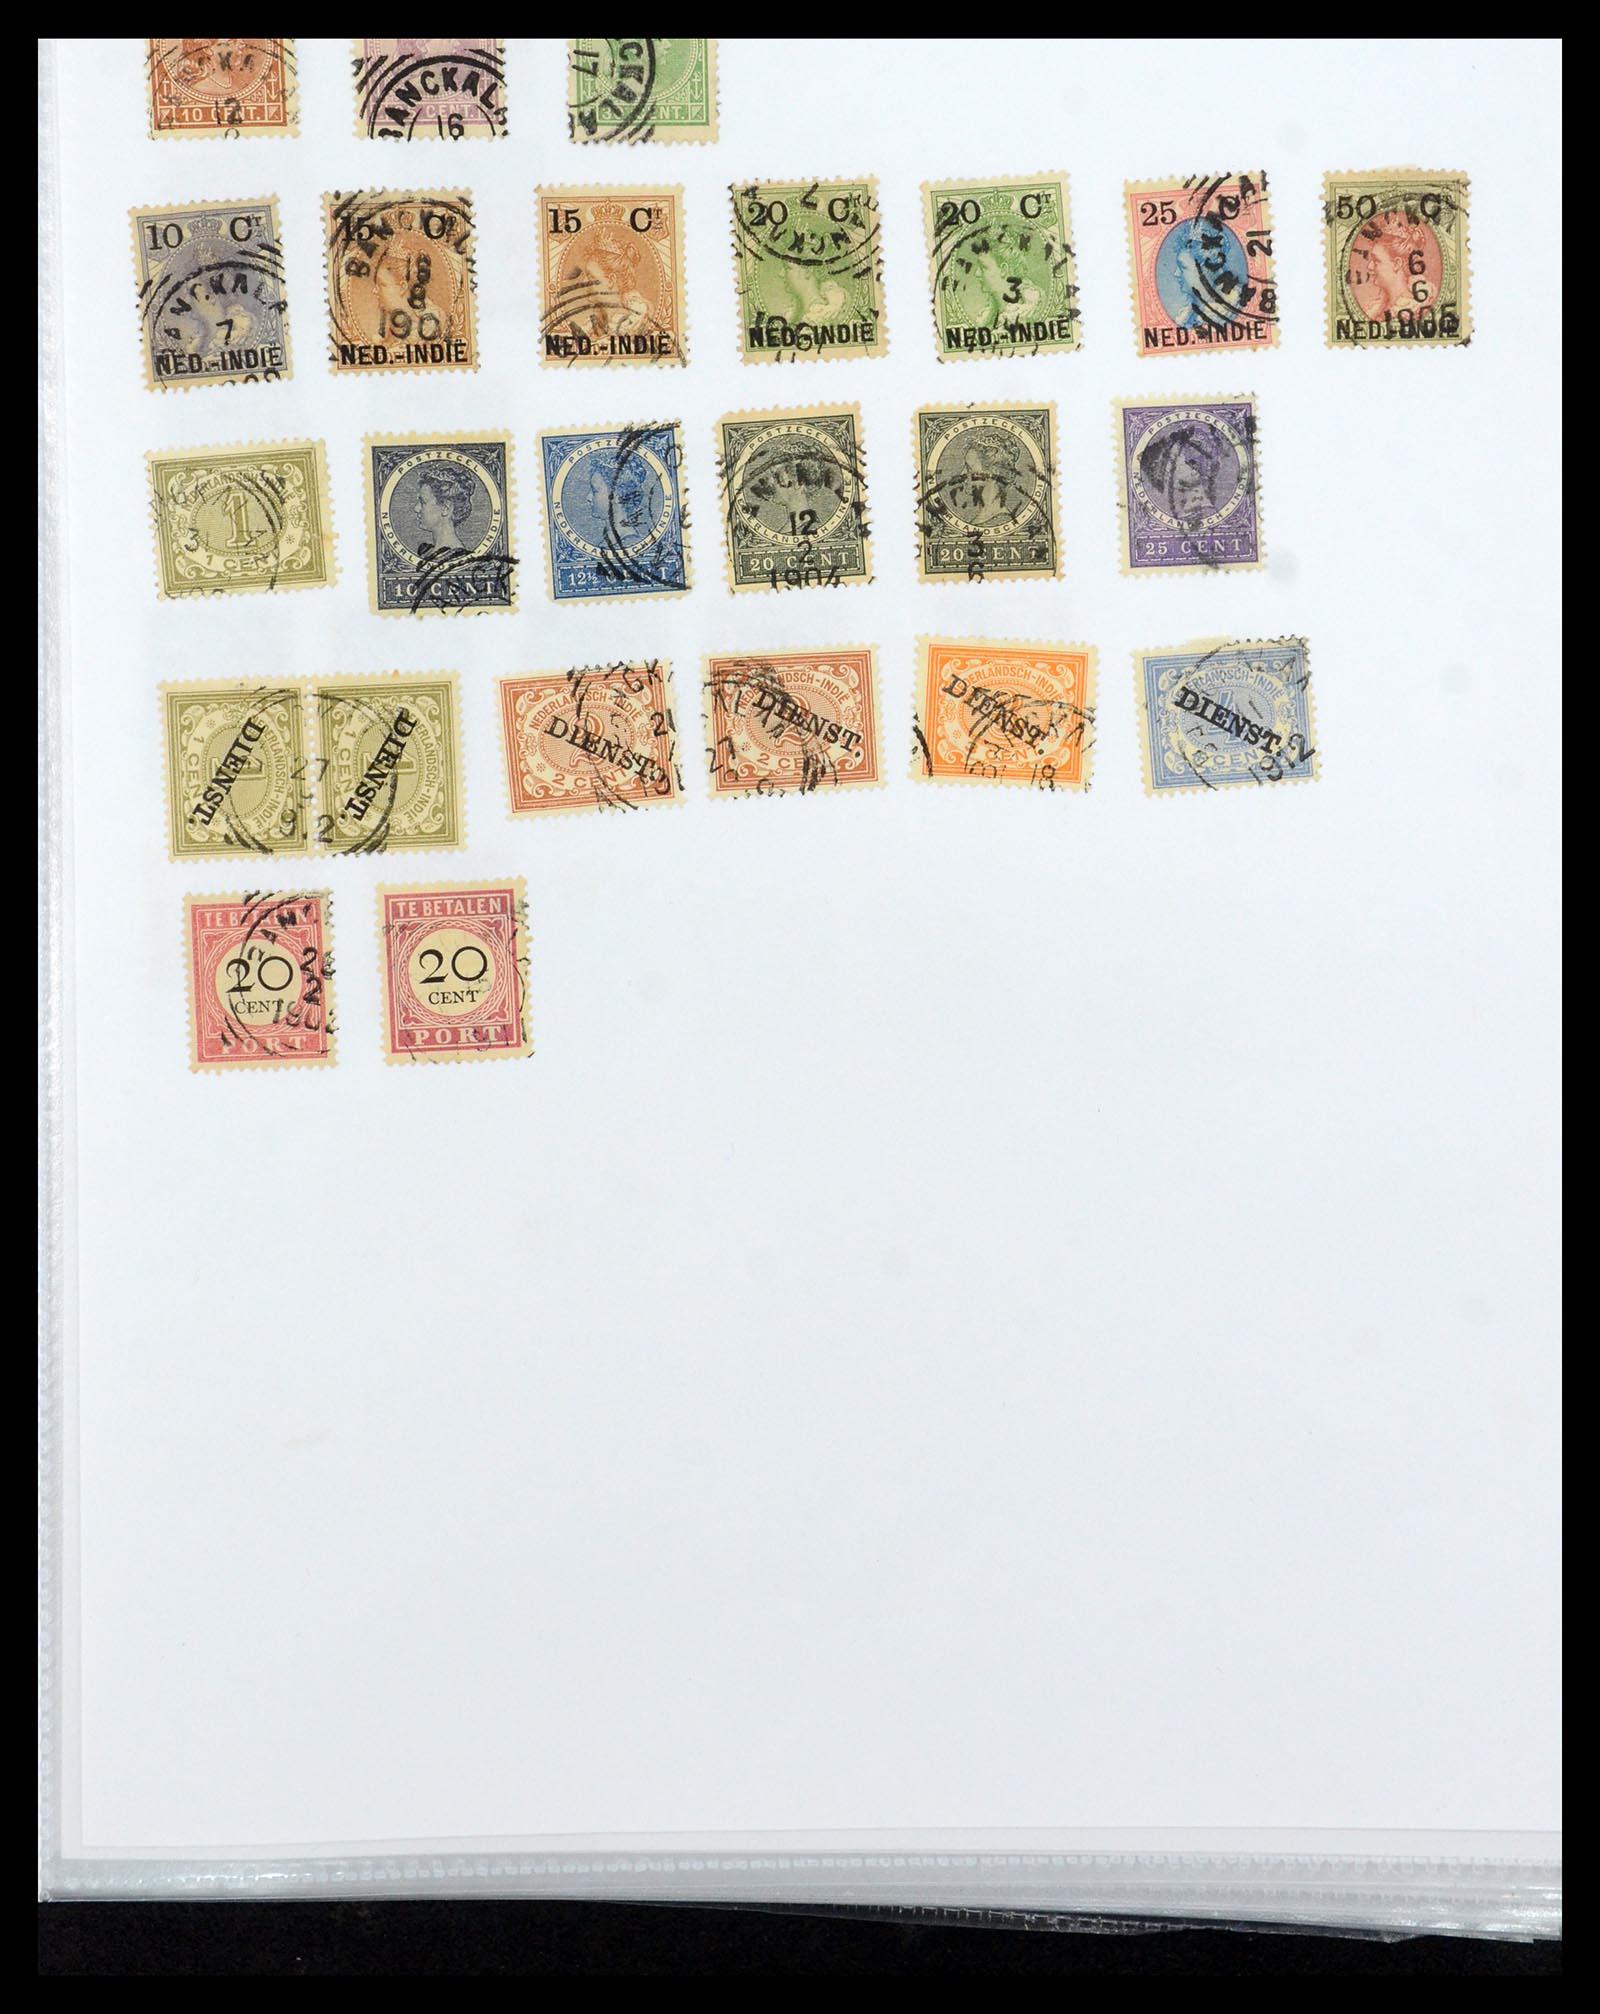 36432 016 - Stamp collection 36432 Dutch east Indies square cancels.